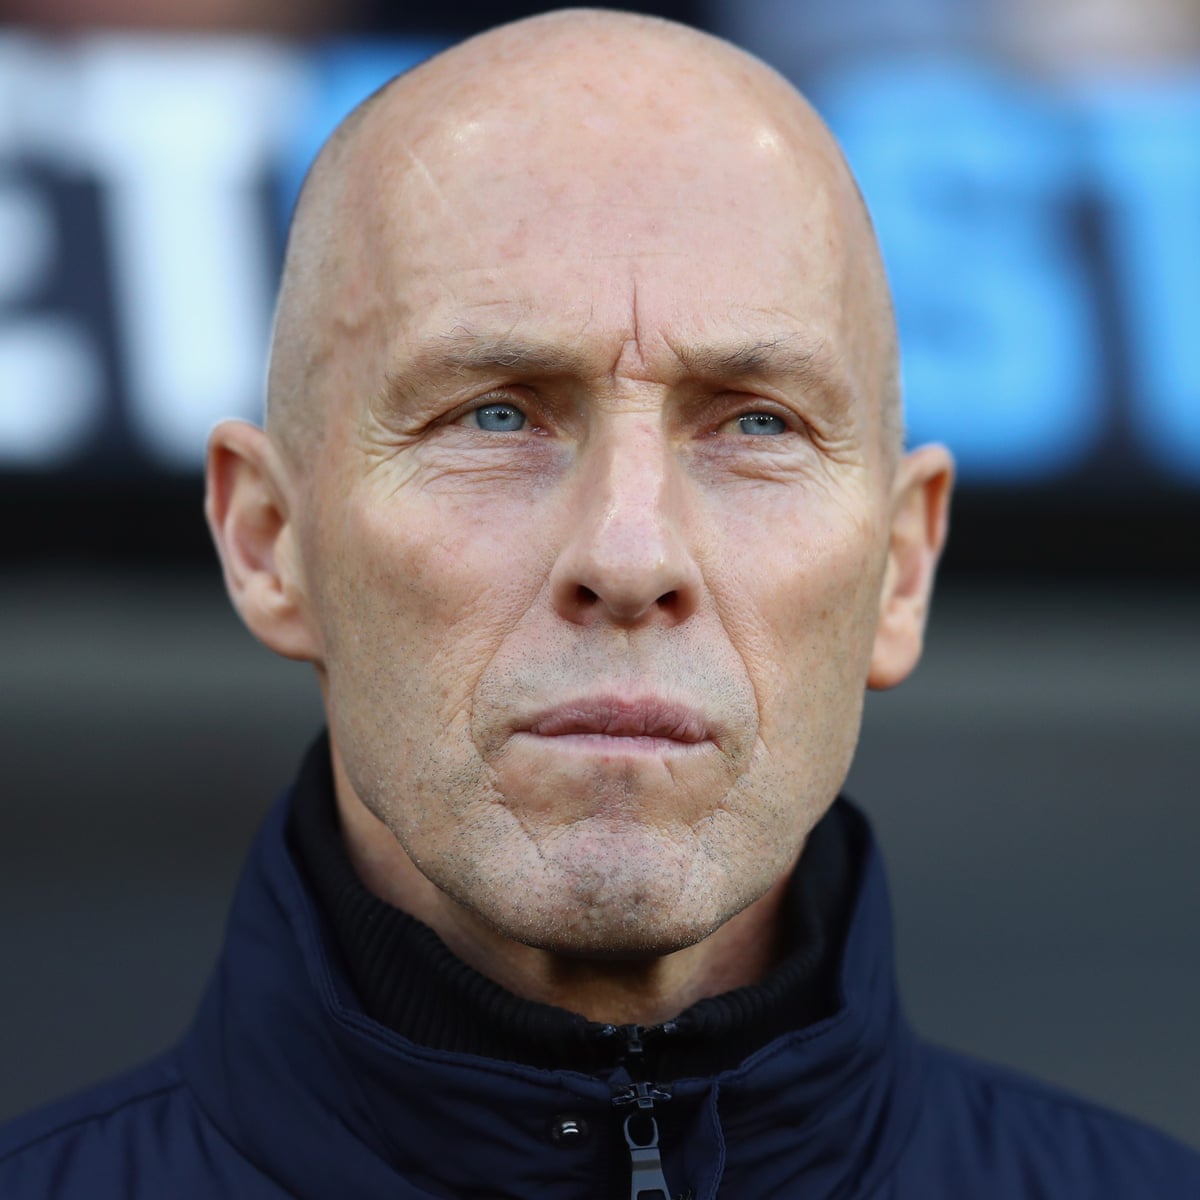 Bob Bradley had to go but blame for Swansea's plight lies in the boardroom  | Swansea City | The Guardian